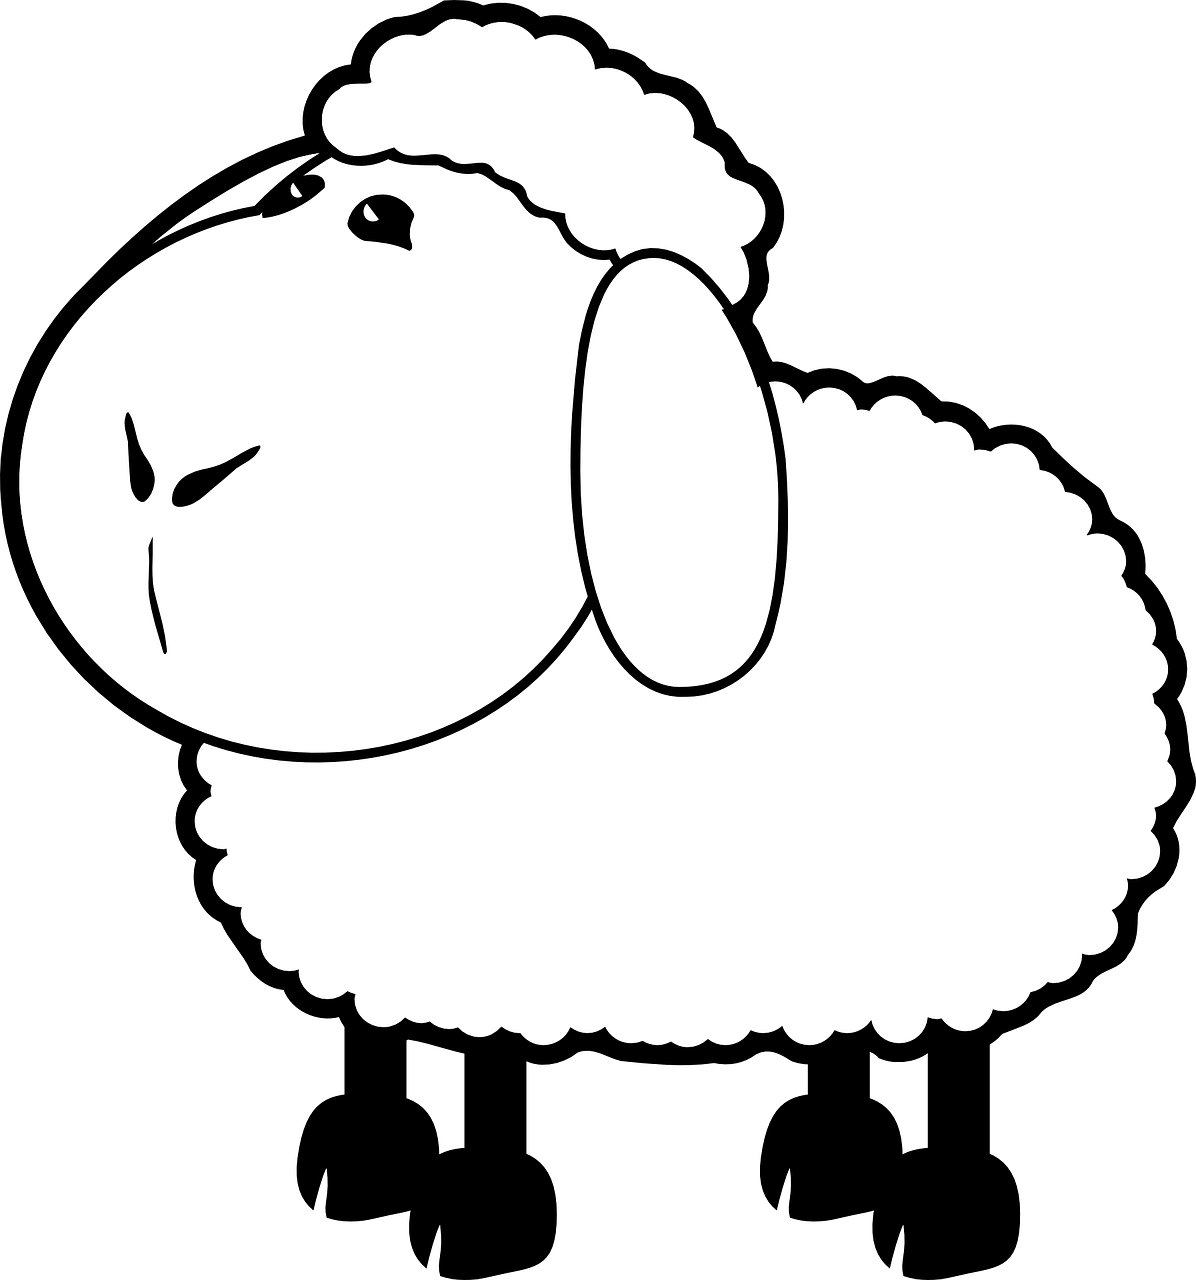 a black and white drawing of a sheep, lineart, inspired by Shūbun Tenshō, pixabay, hurufiyya, fluffy'', on a flat color black background, simple cartoon, a brightly colored